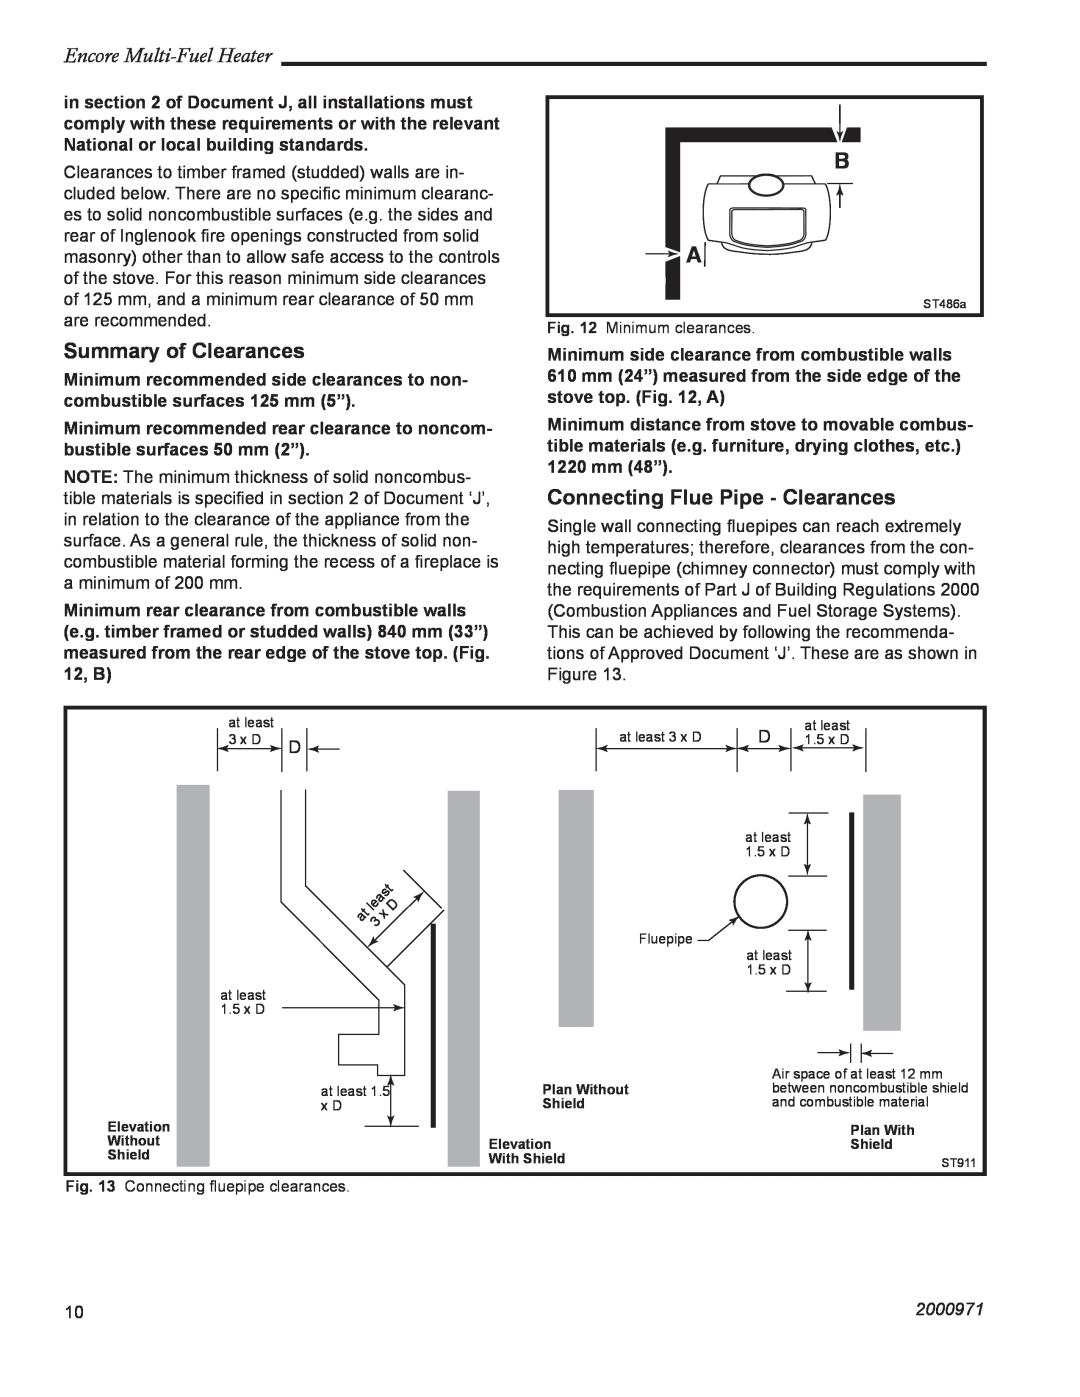 Vermont Casting 2547CE Summary of Clearances, Connecting Flue Pipe - Clearances, Encore Multi-FuelHeater, 2000971 